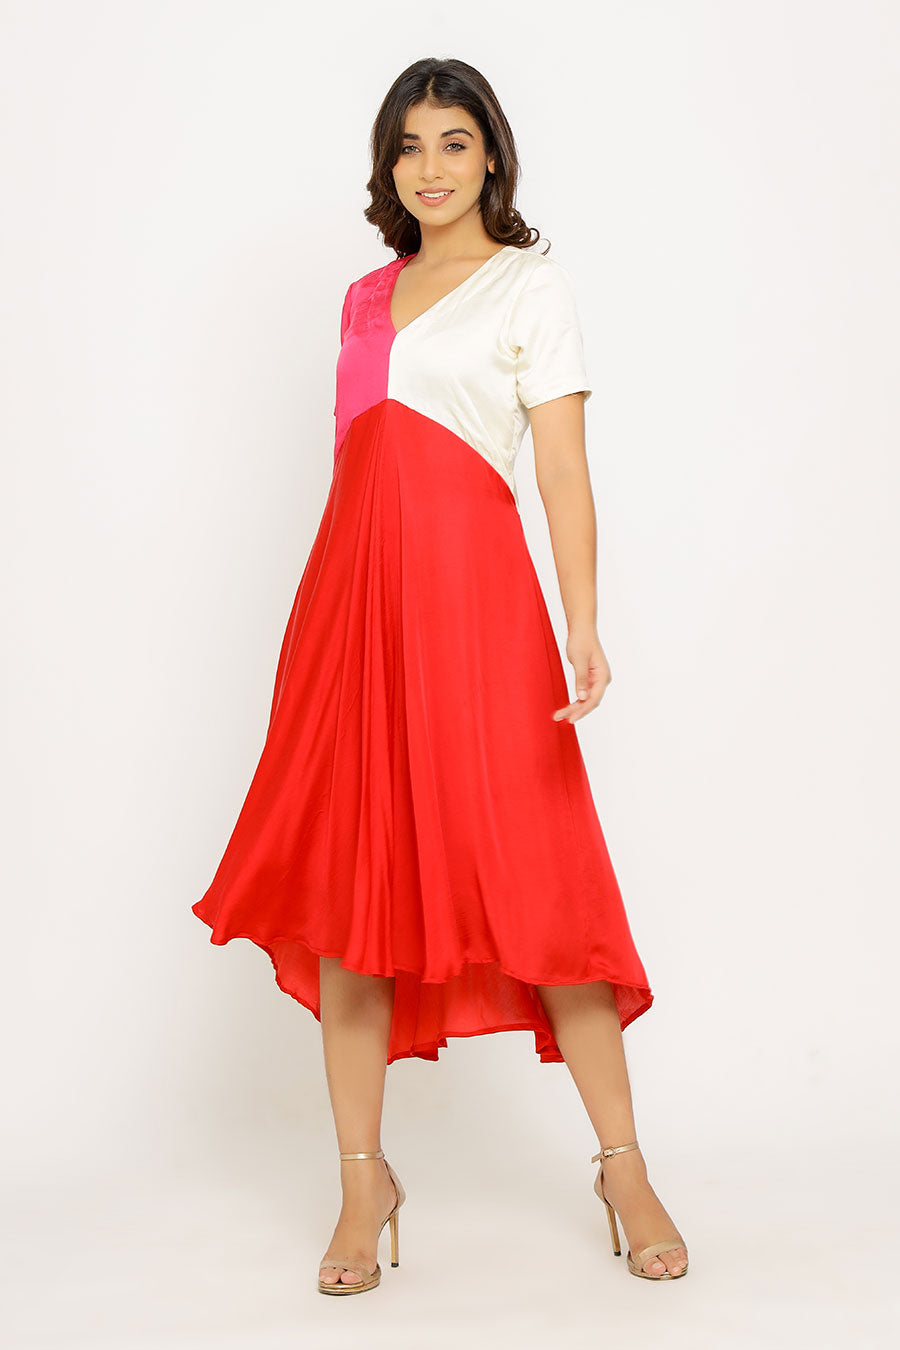 Red-Pink-White Colour Block Dress